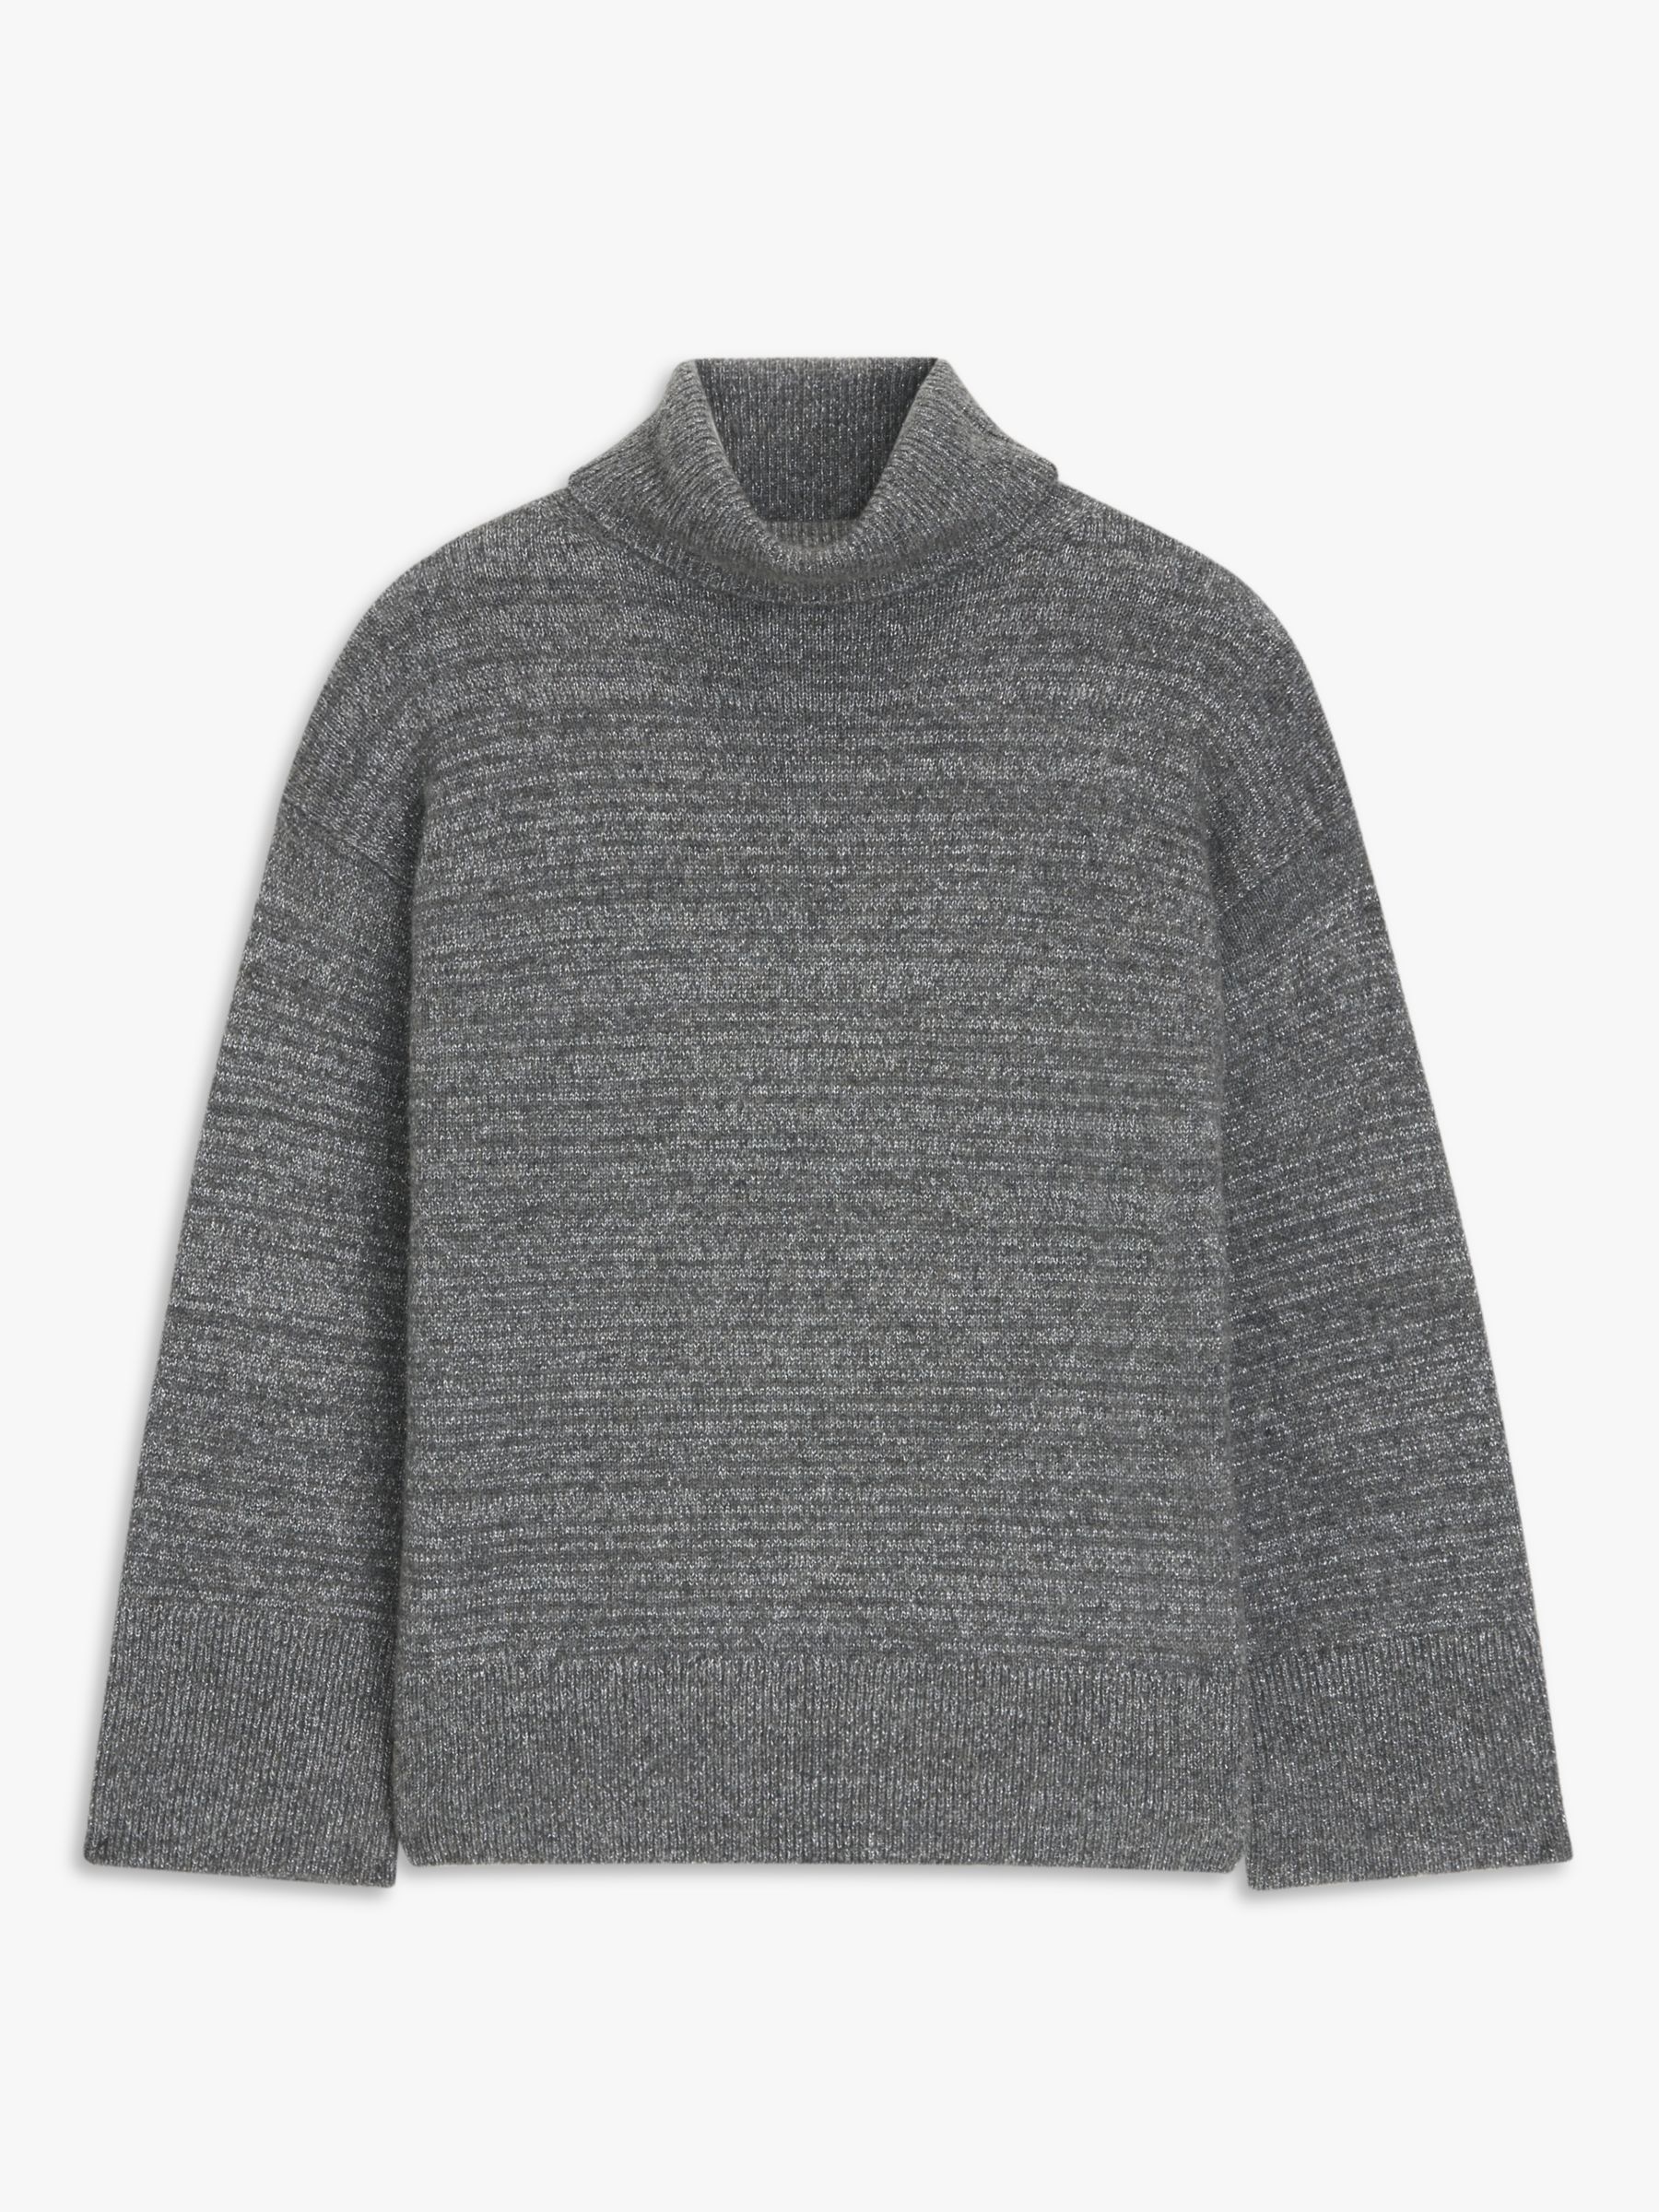 AND/OR Lucy Metallic Thread Roll Neck Jumper, Charcoal £59.00